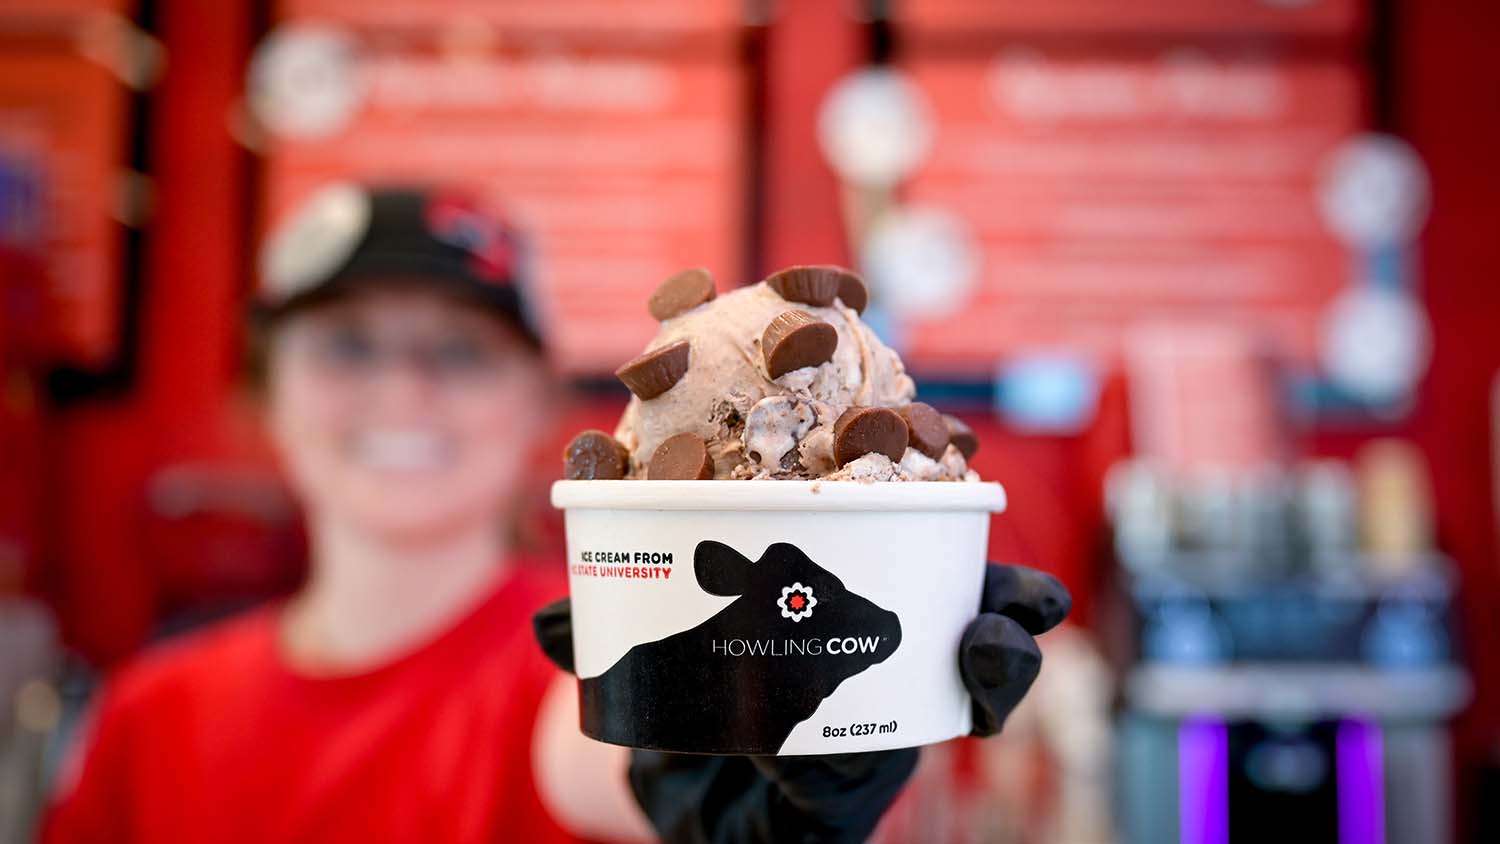 An employee at the Howling Cow creamery holds up a fresh scoop.